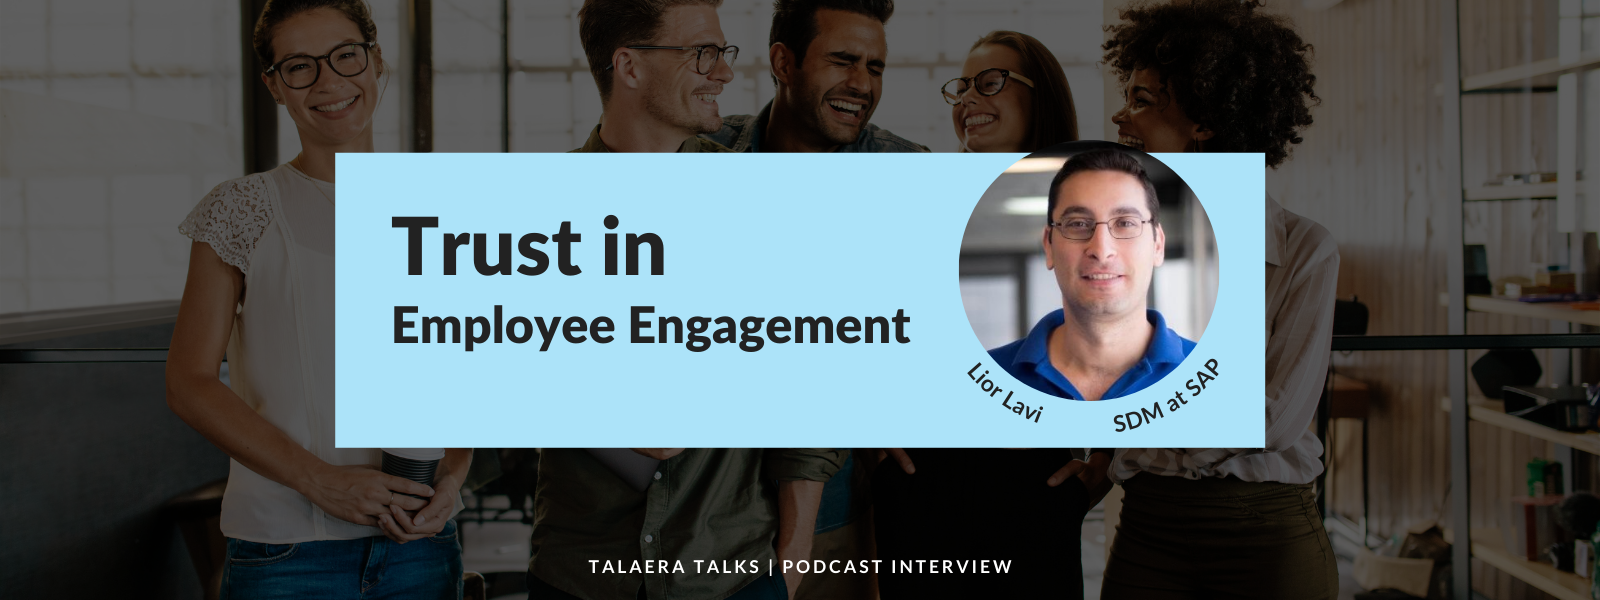 Trust and Employee Engagement - Interview with Lior Lavi for Talaera Talks.png